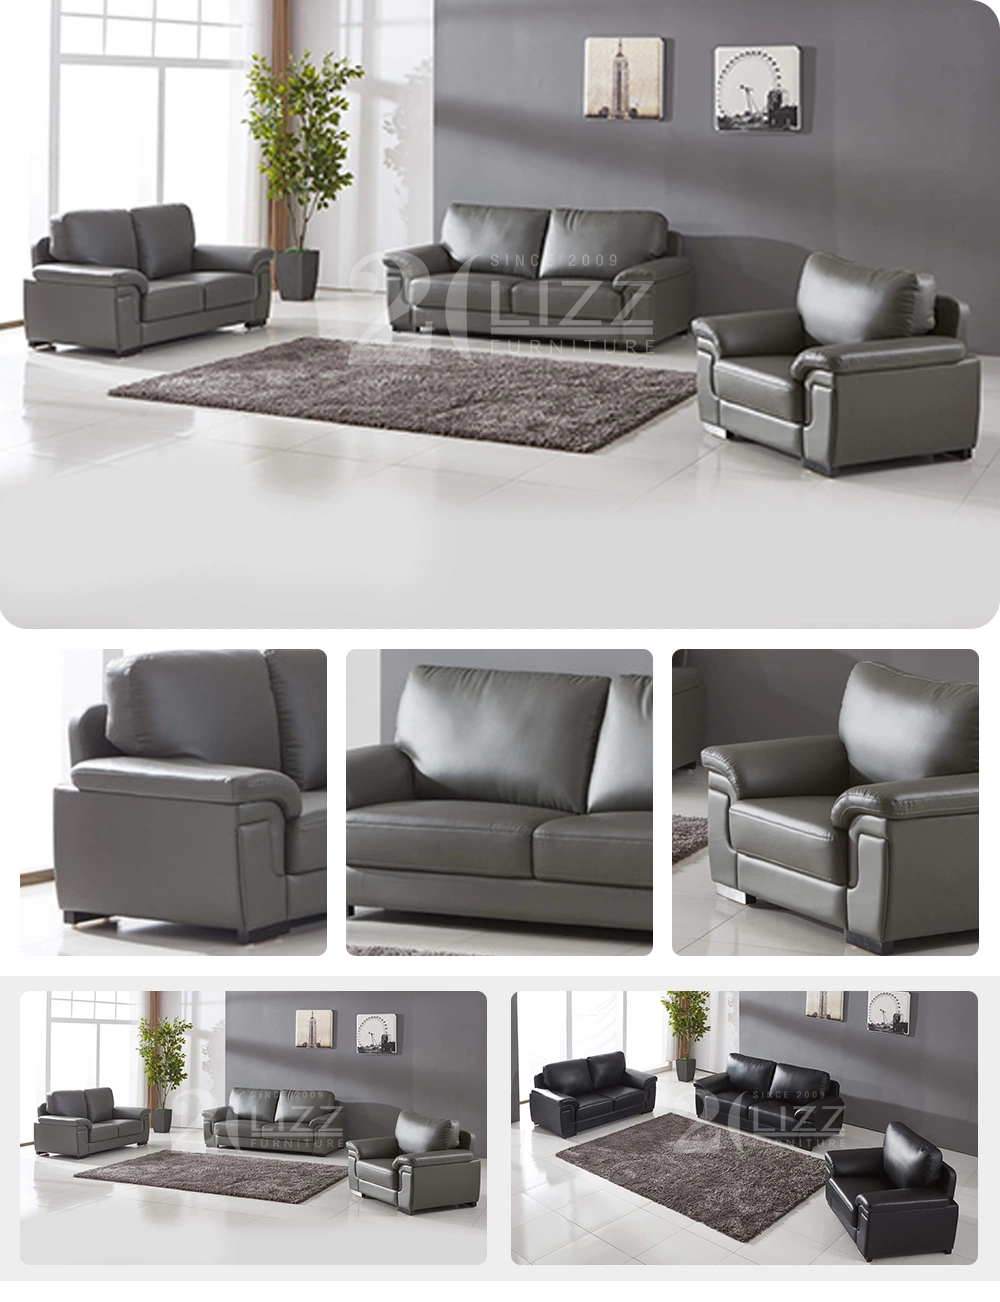 Online Discount Home Furniture Living Room European Style Bonded Leather Sofa Set